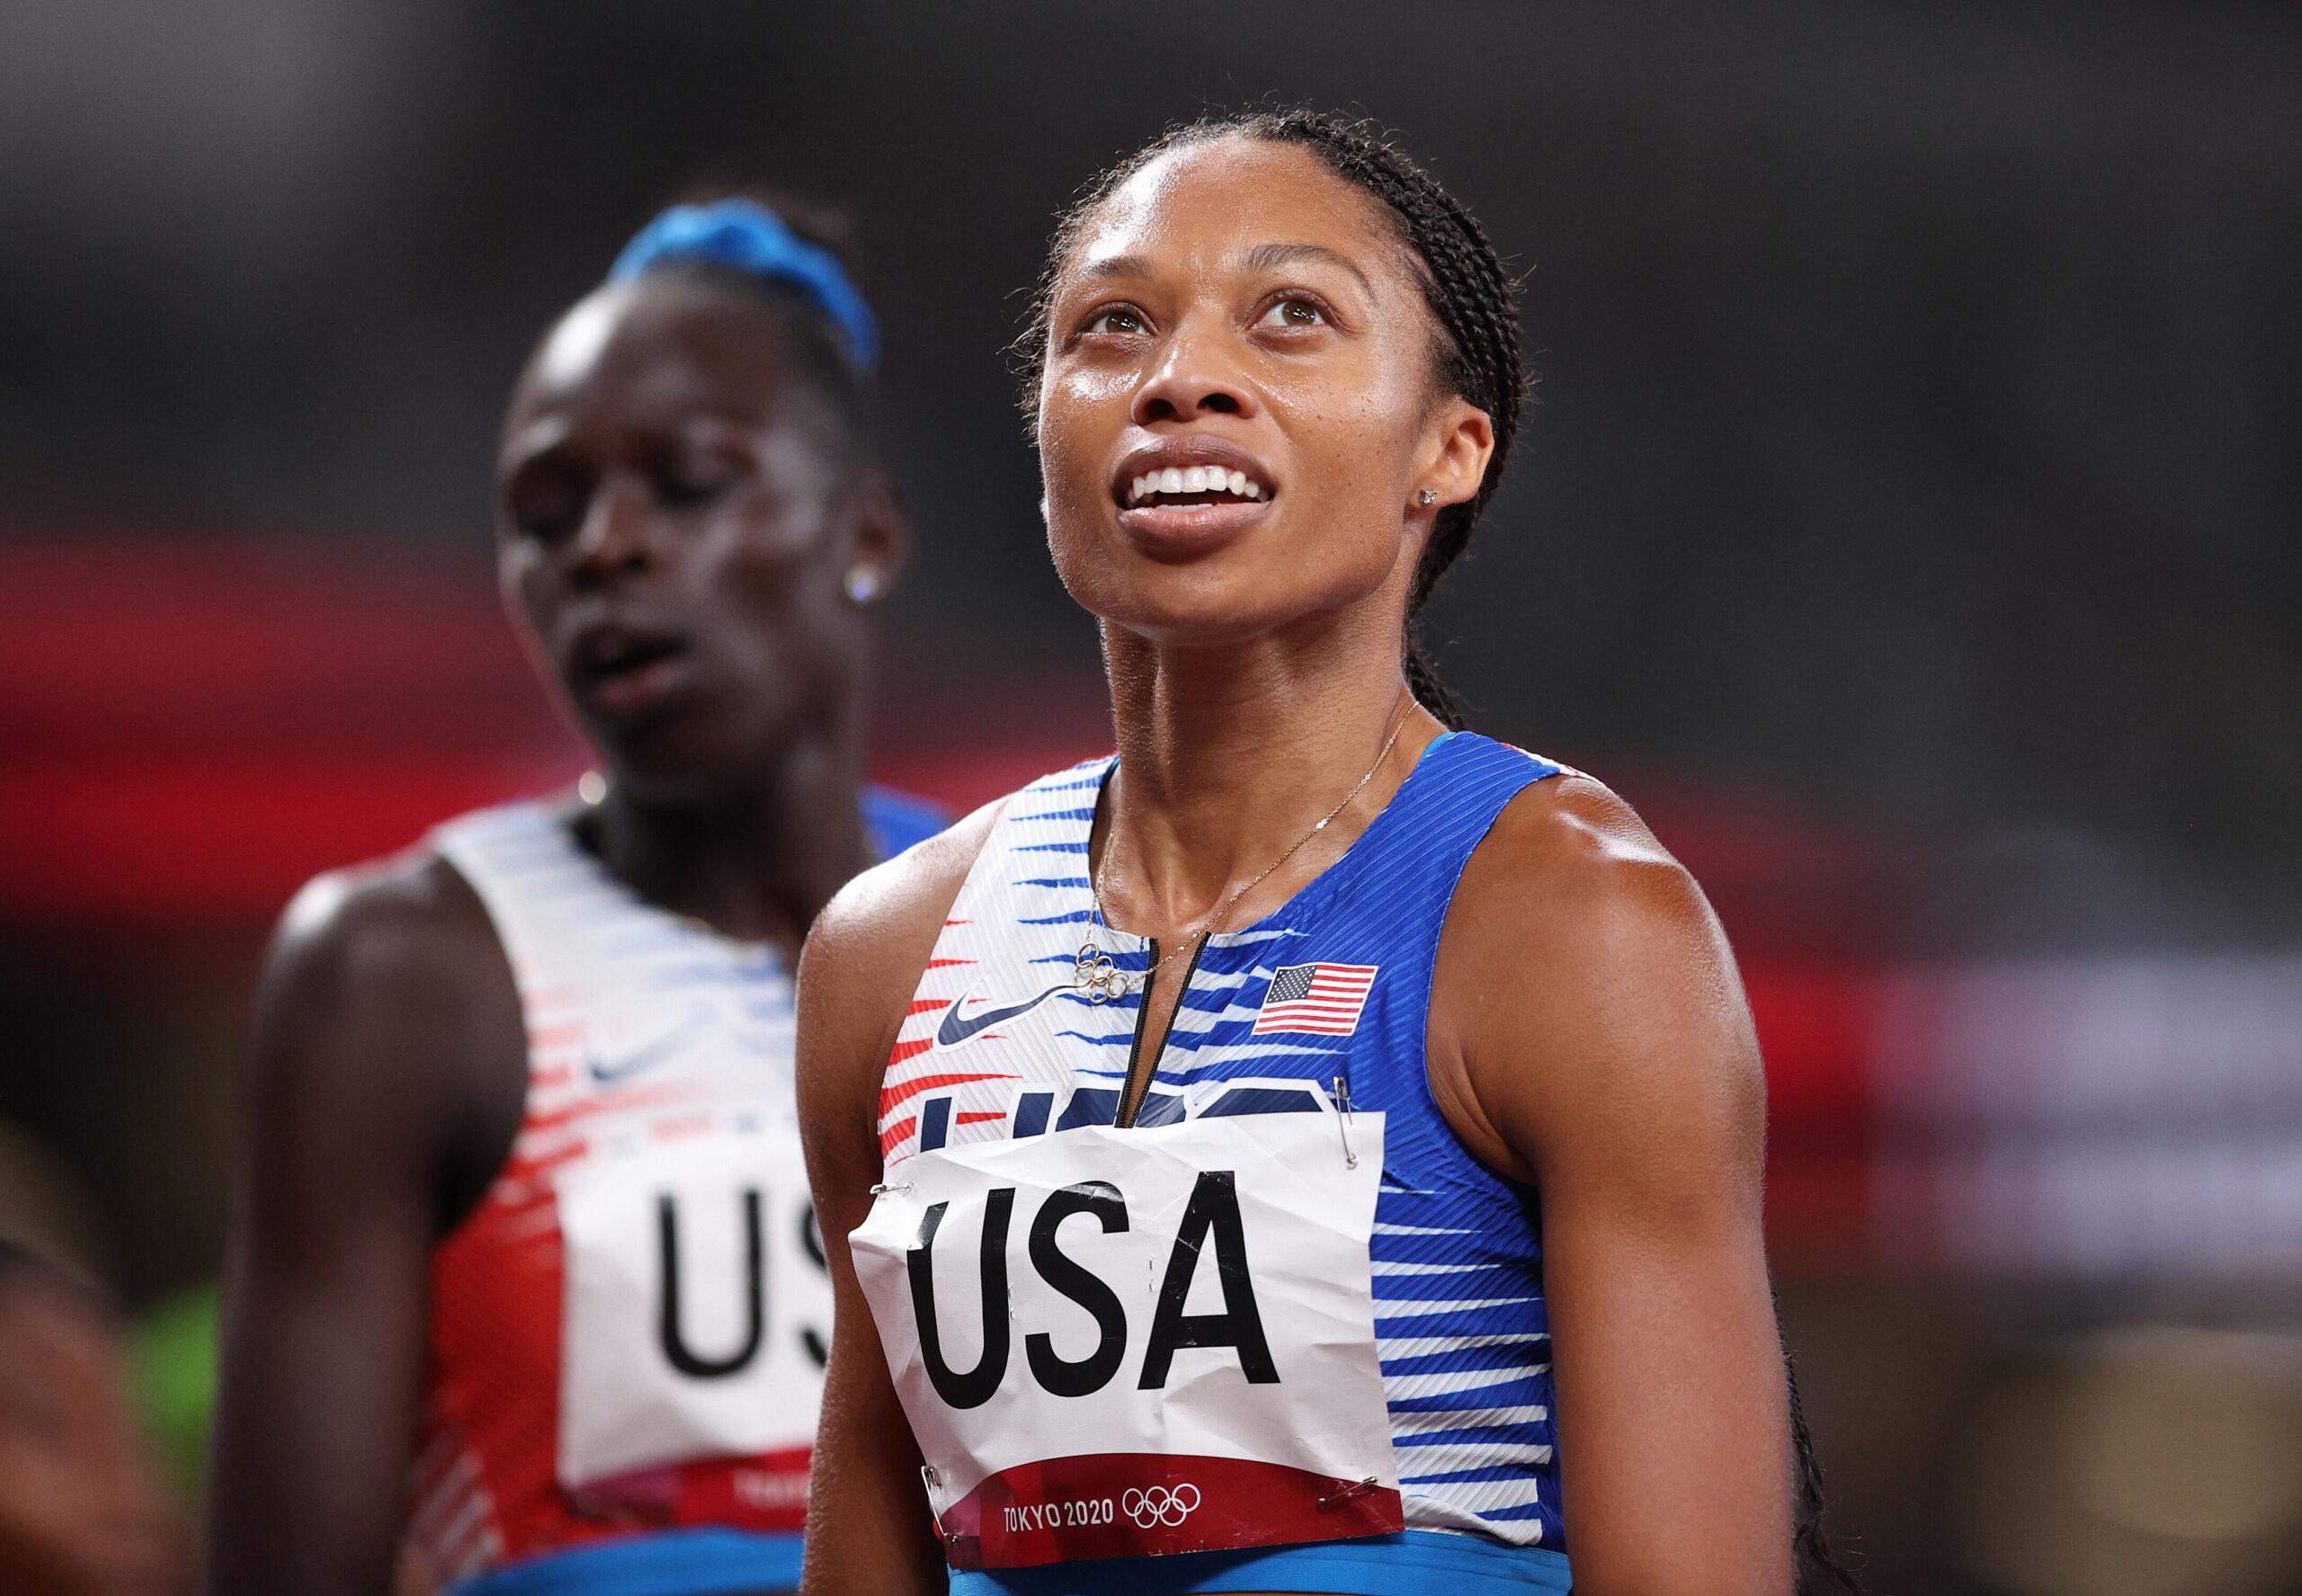 <i>Patrick Smith/Getty Images AsiaPac/Getty Images</i><br/>Allyson Felix reacts after winning the gold medal in the women' s 4 x 400m relay final at Tokyo 2020.